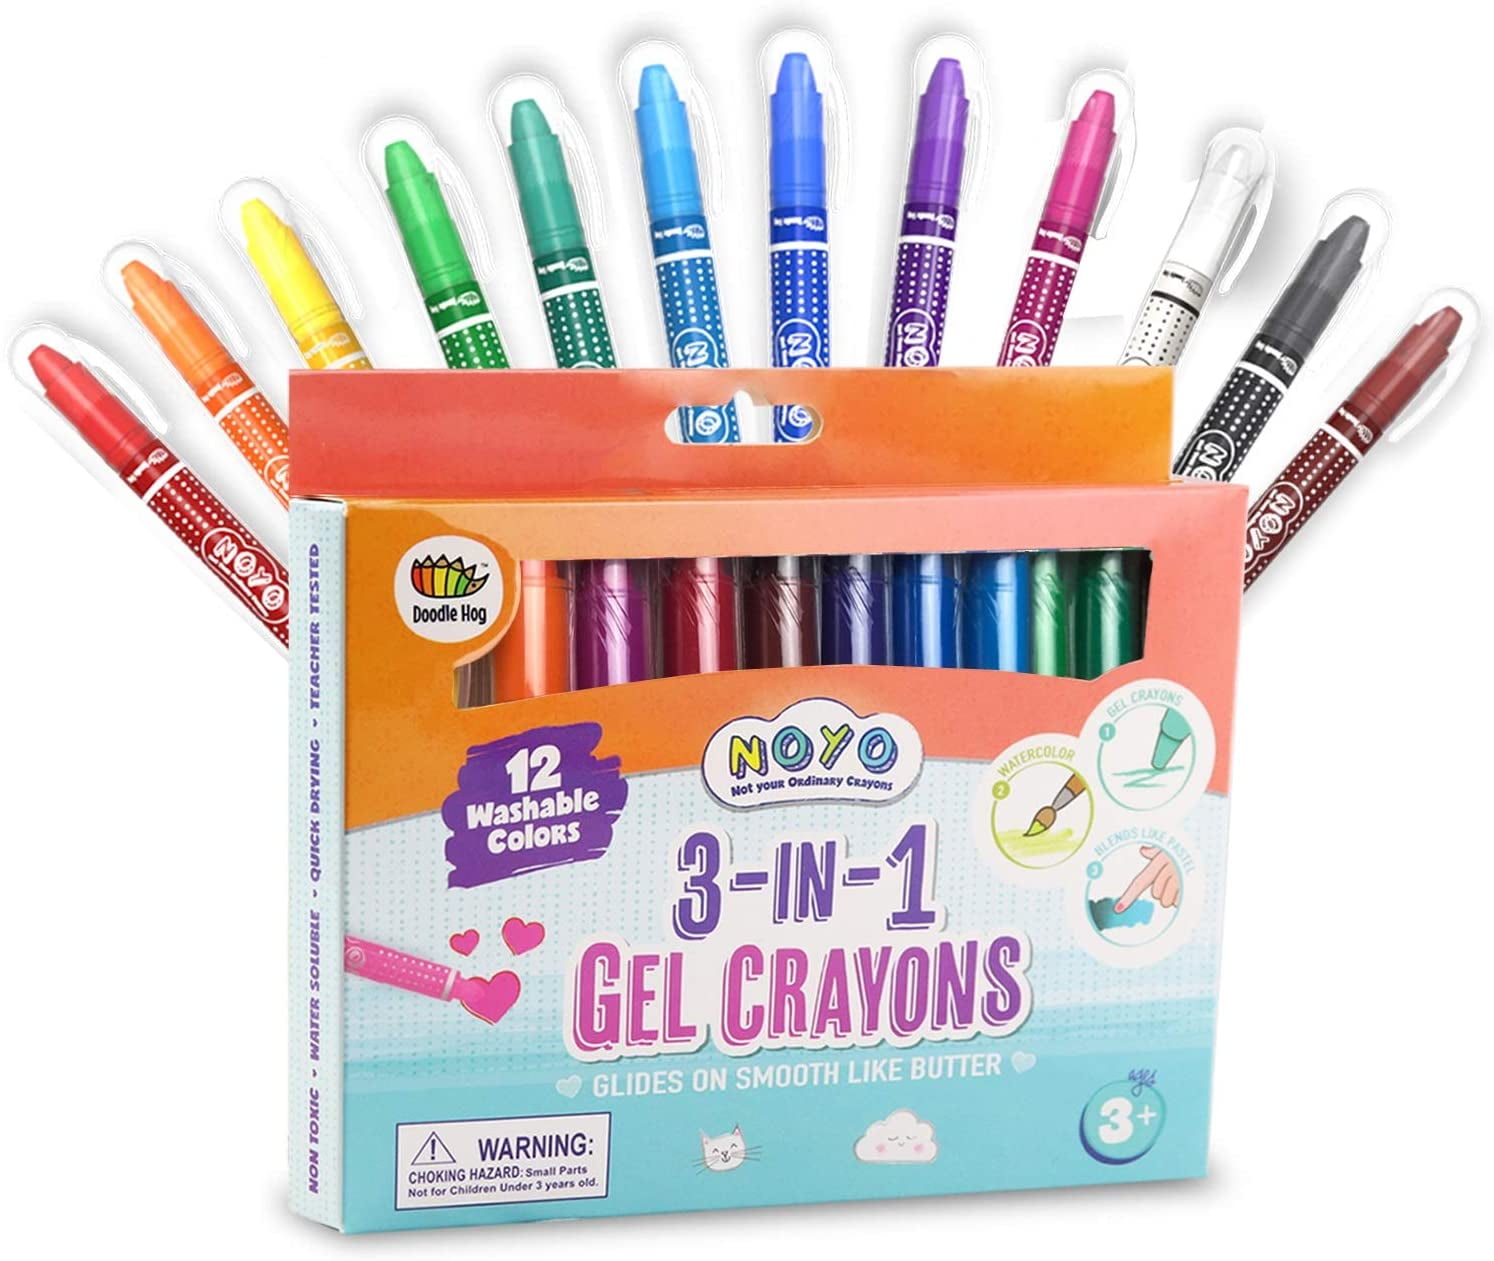  Giotto be-bè Large Wax Crayons, 10 Assorted Colours,  Super-Washable, Ideal for Children and Schools : Toys & Games